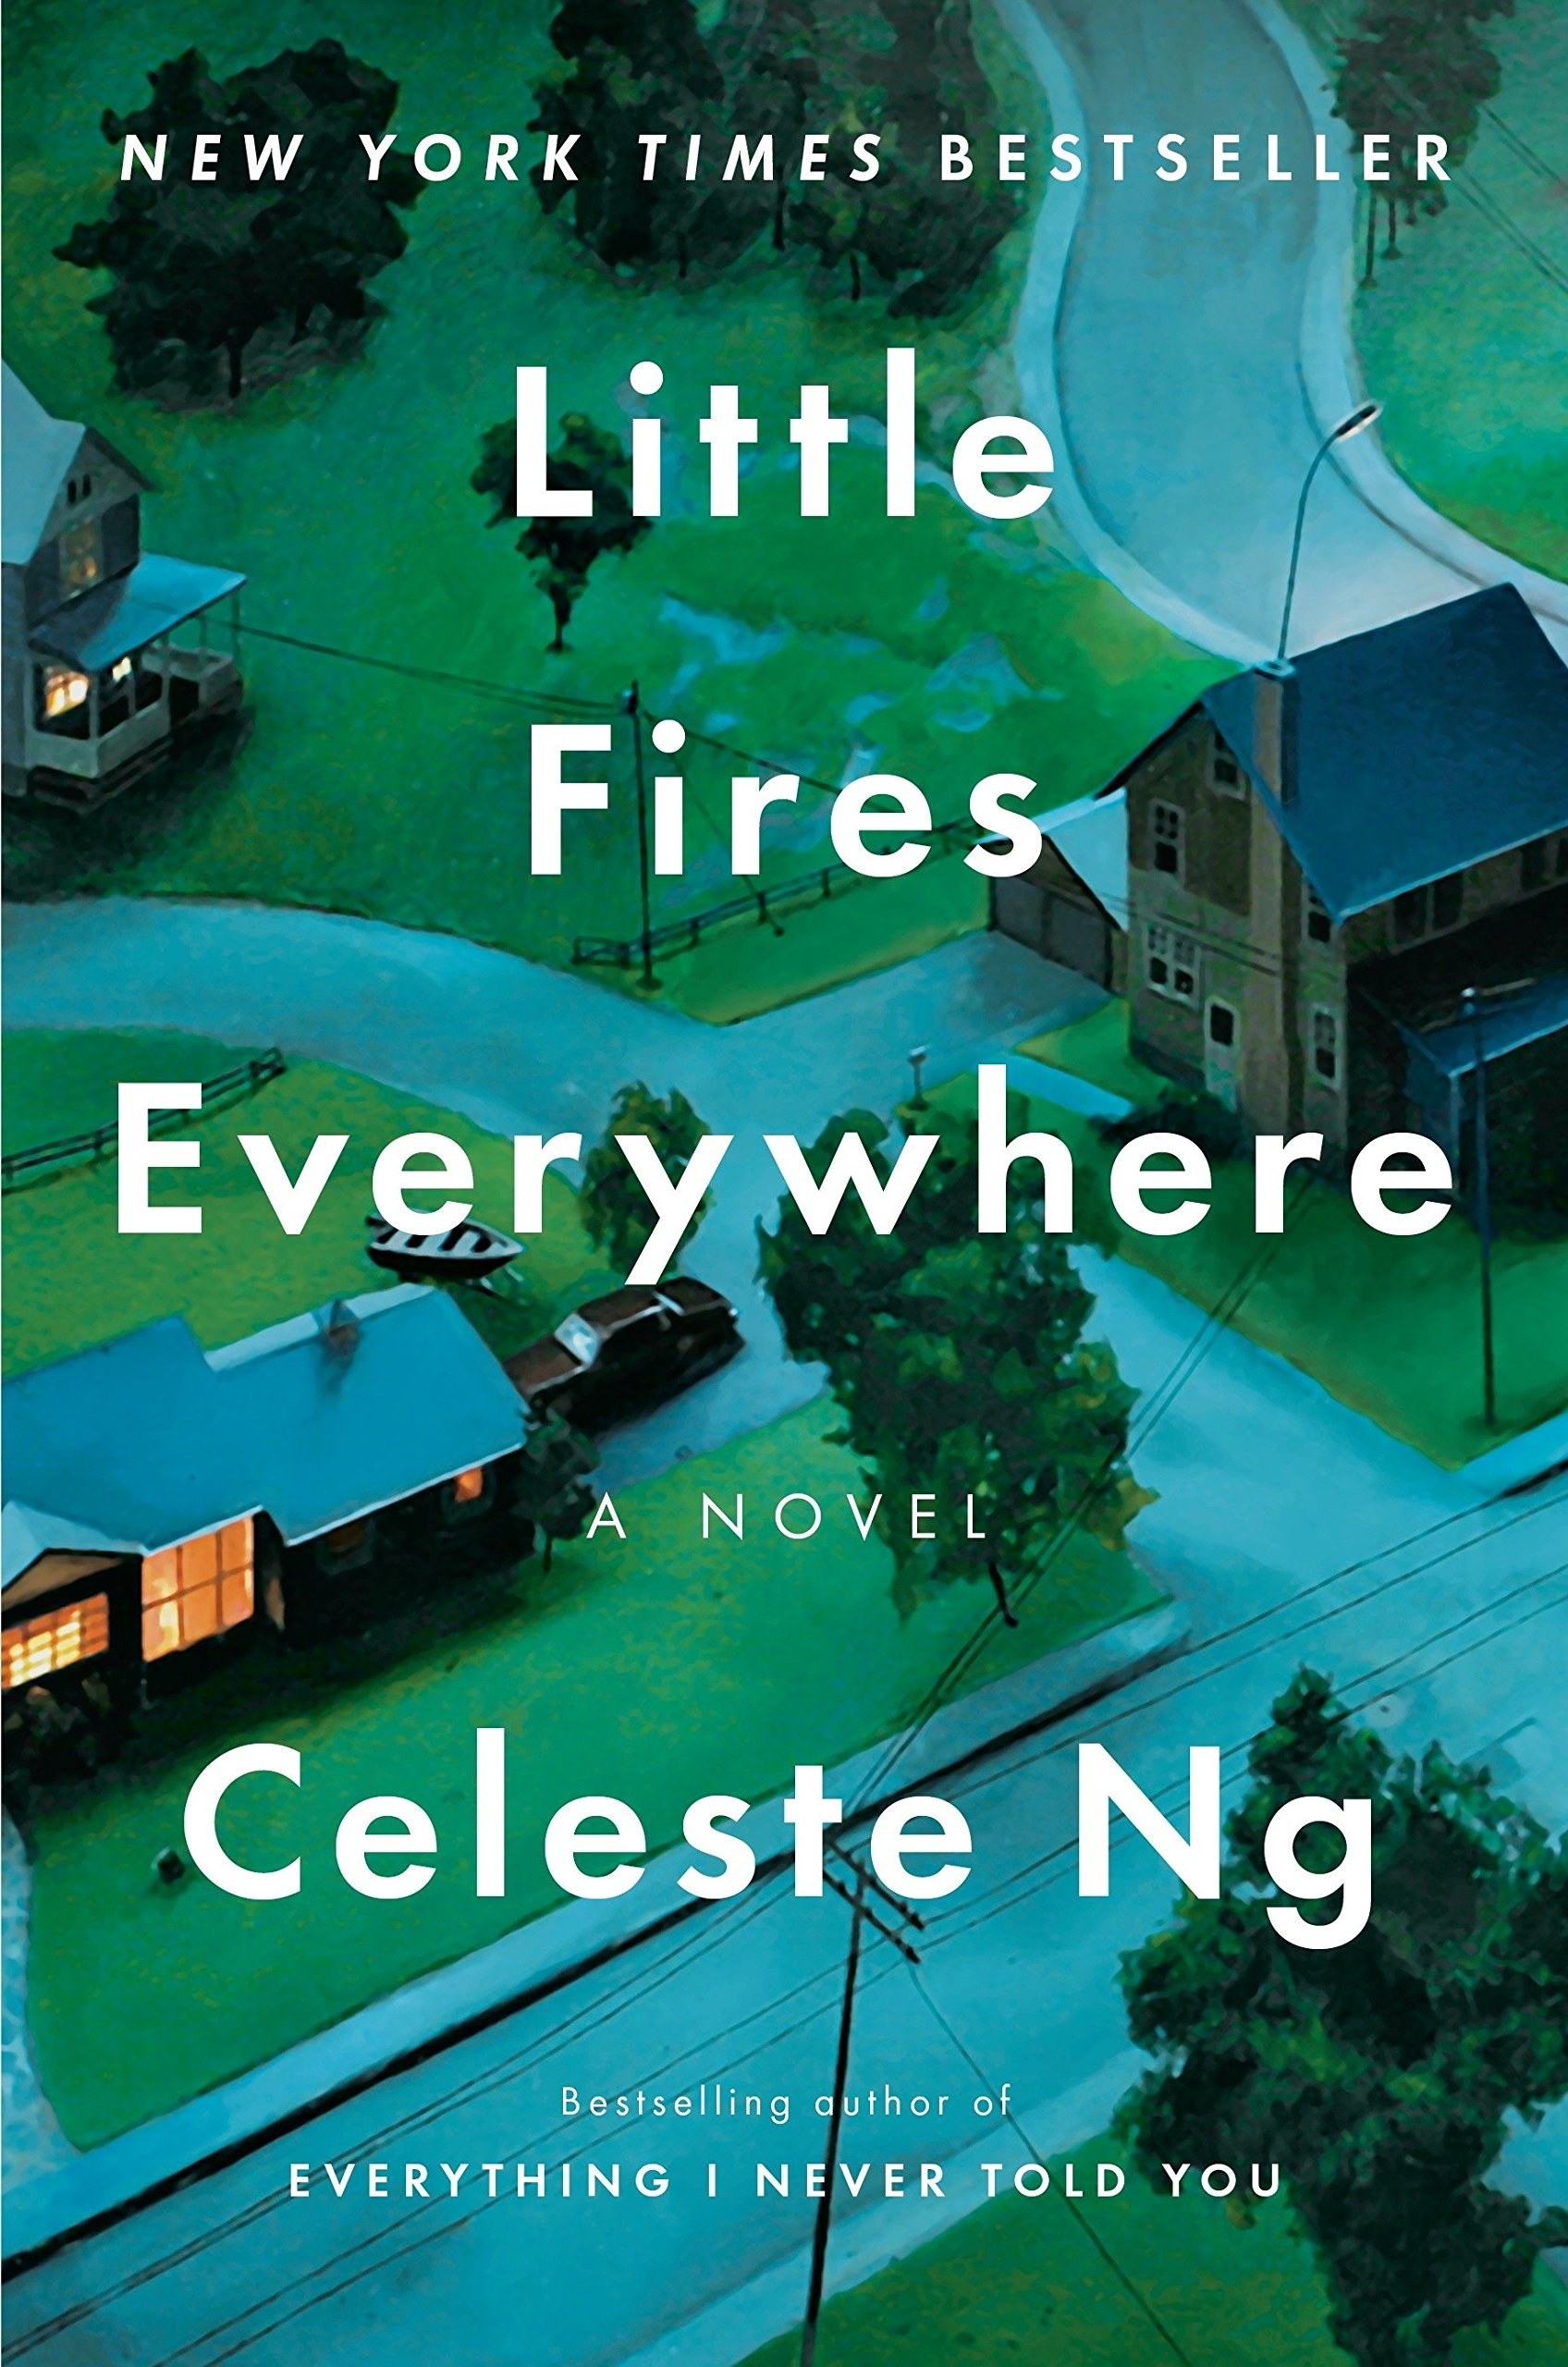 &quot;Little Fires Everywhere&quot; by Celeste Ng